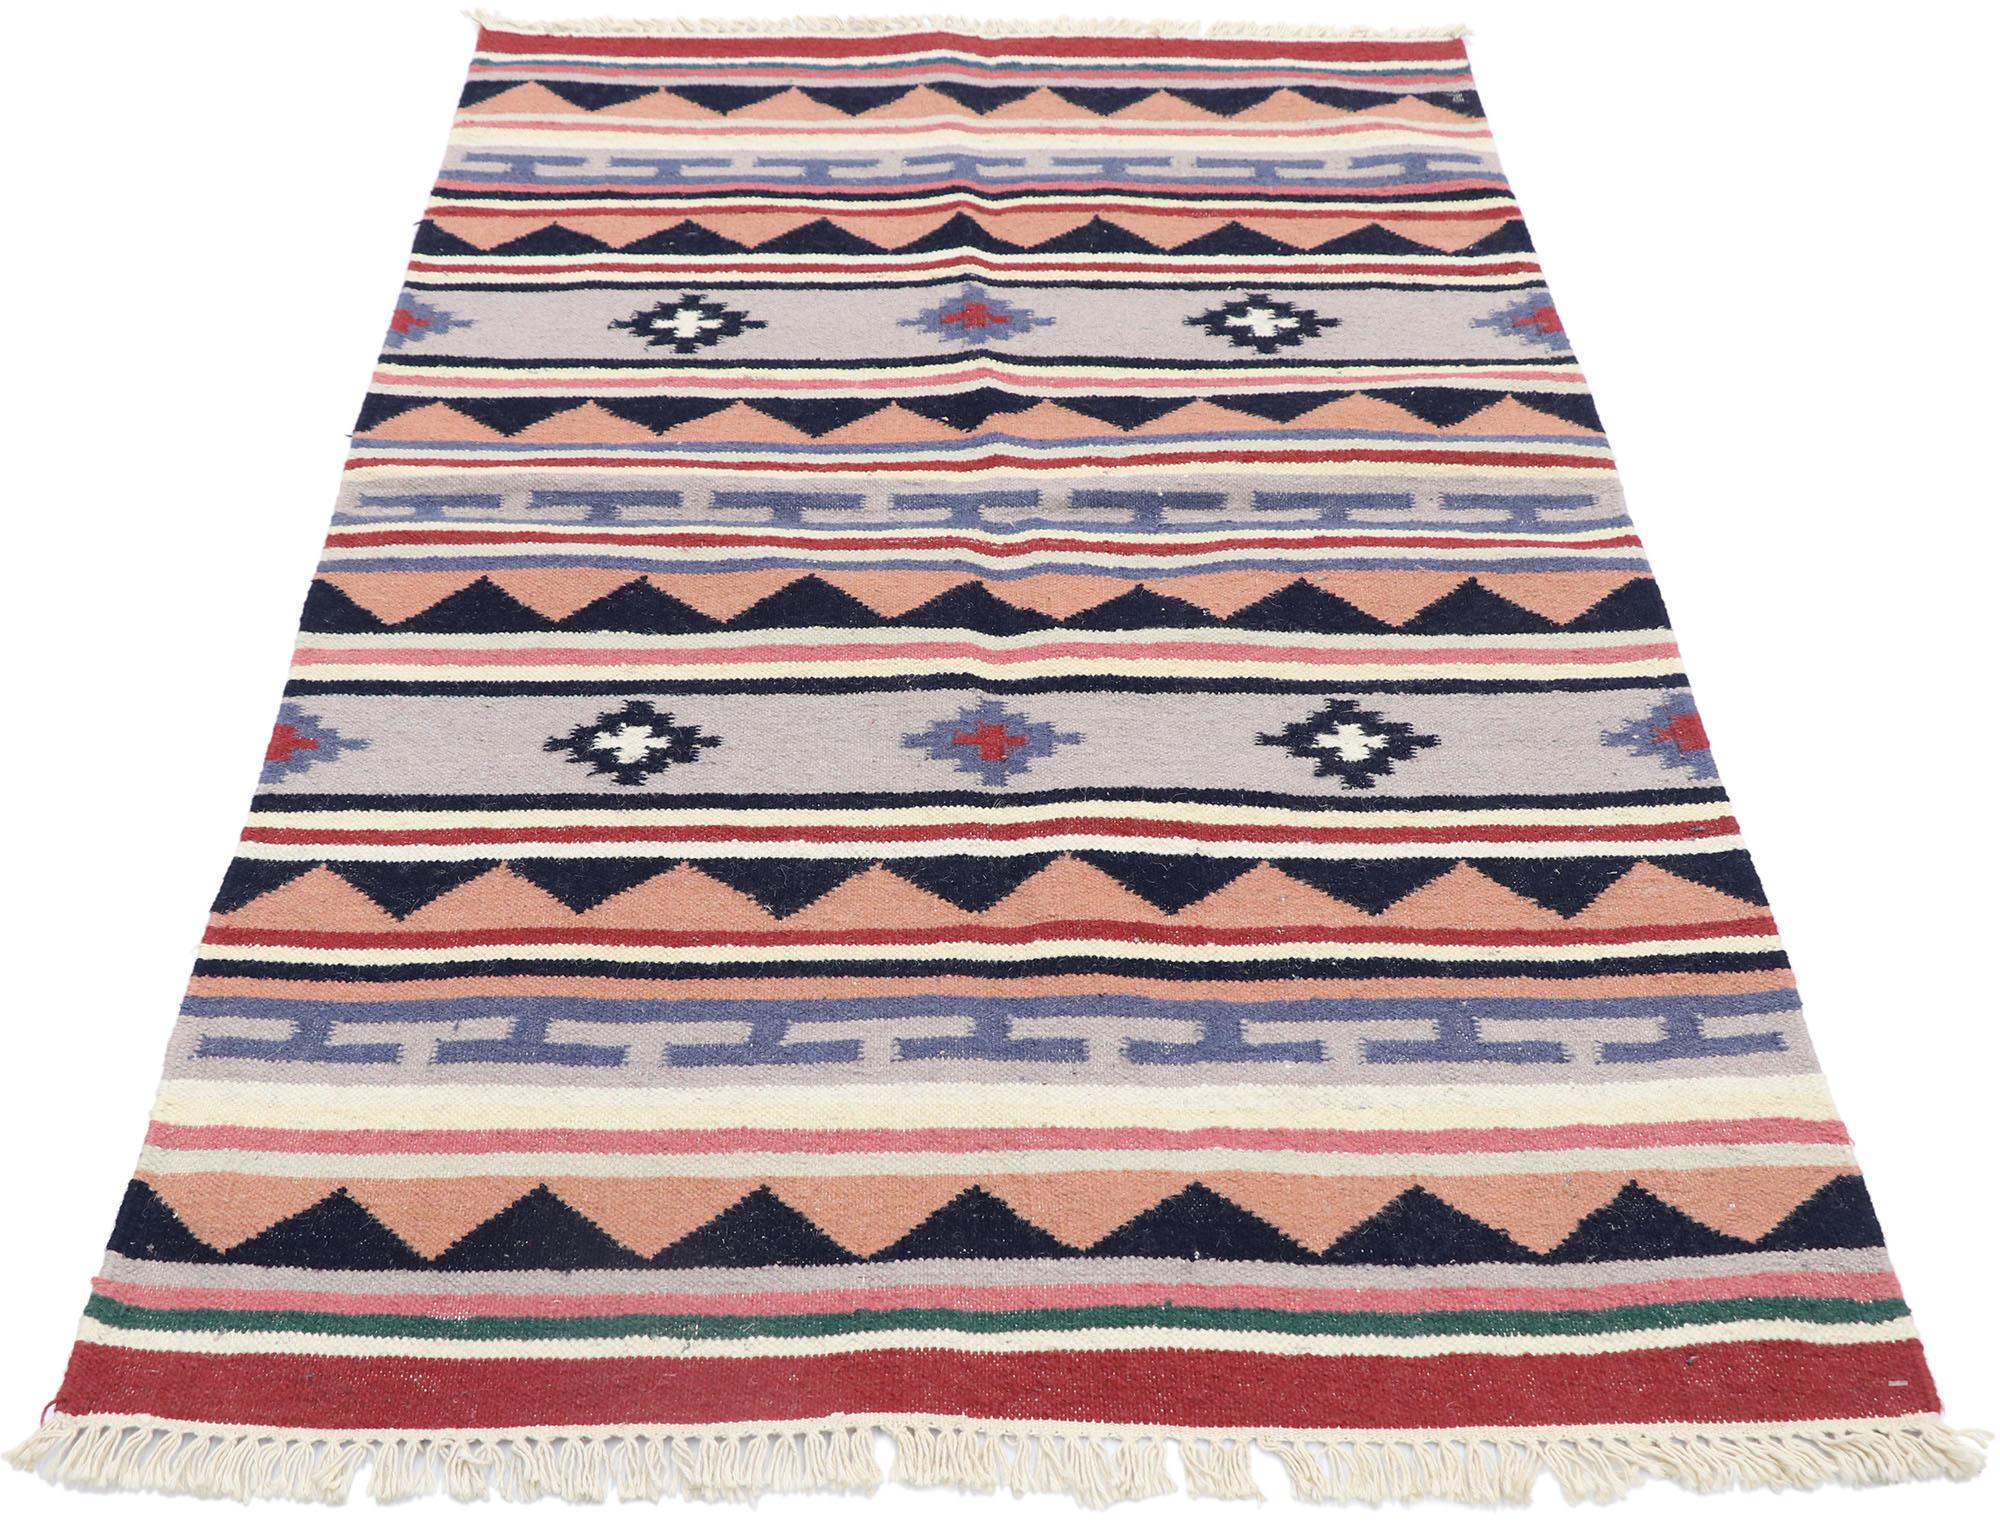 Hand-Woven Vintage Persian Shiraz Kilim Rug with Boho Chic Tribal Style For Sale